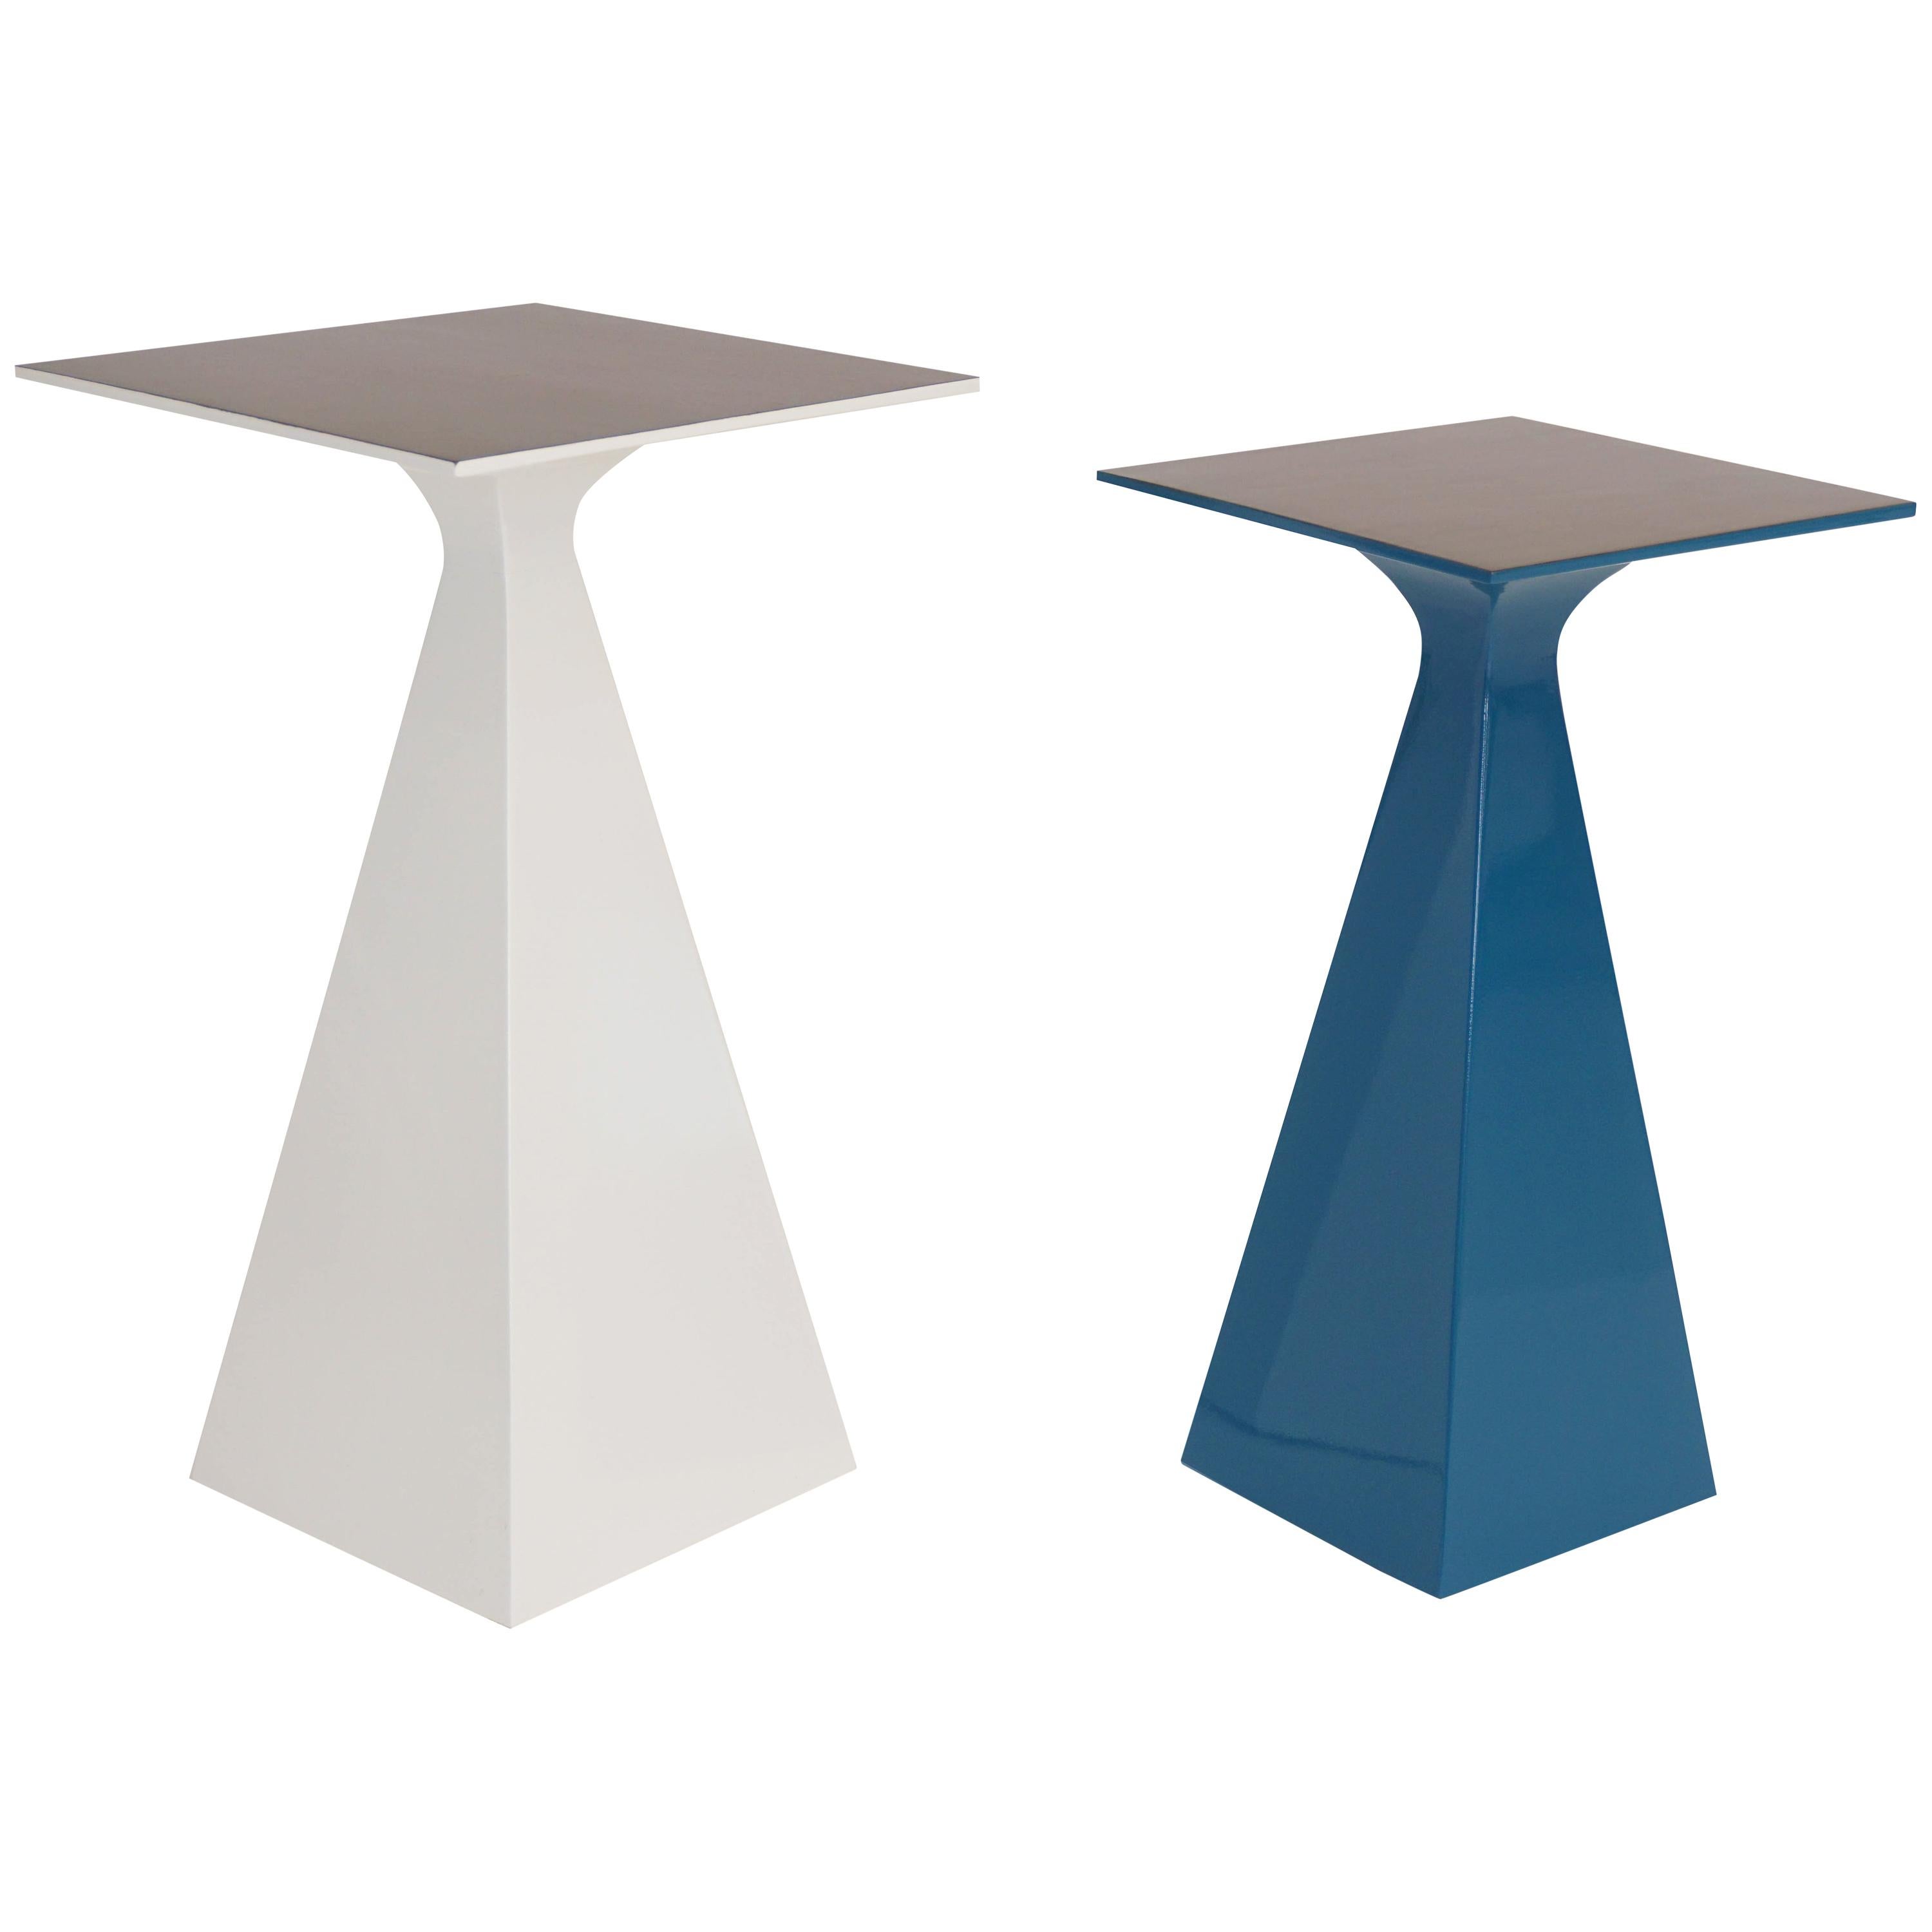 Pair of Square Cocktail Tables For Sale